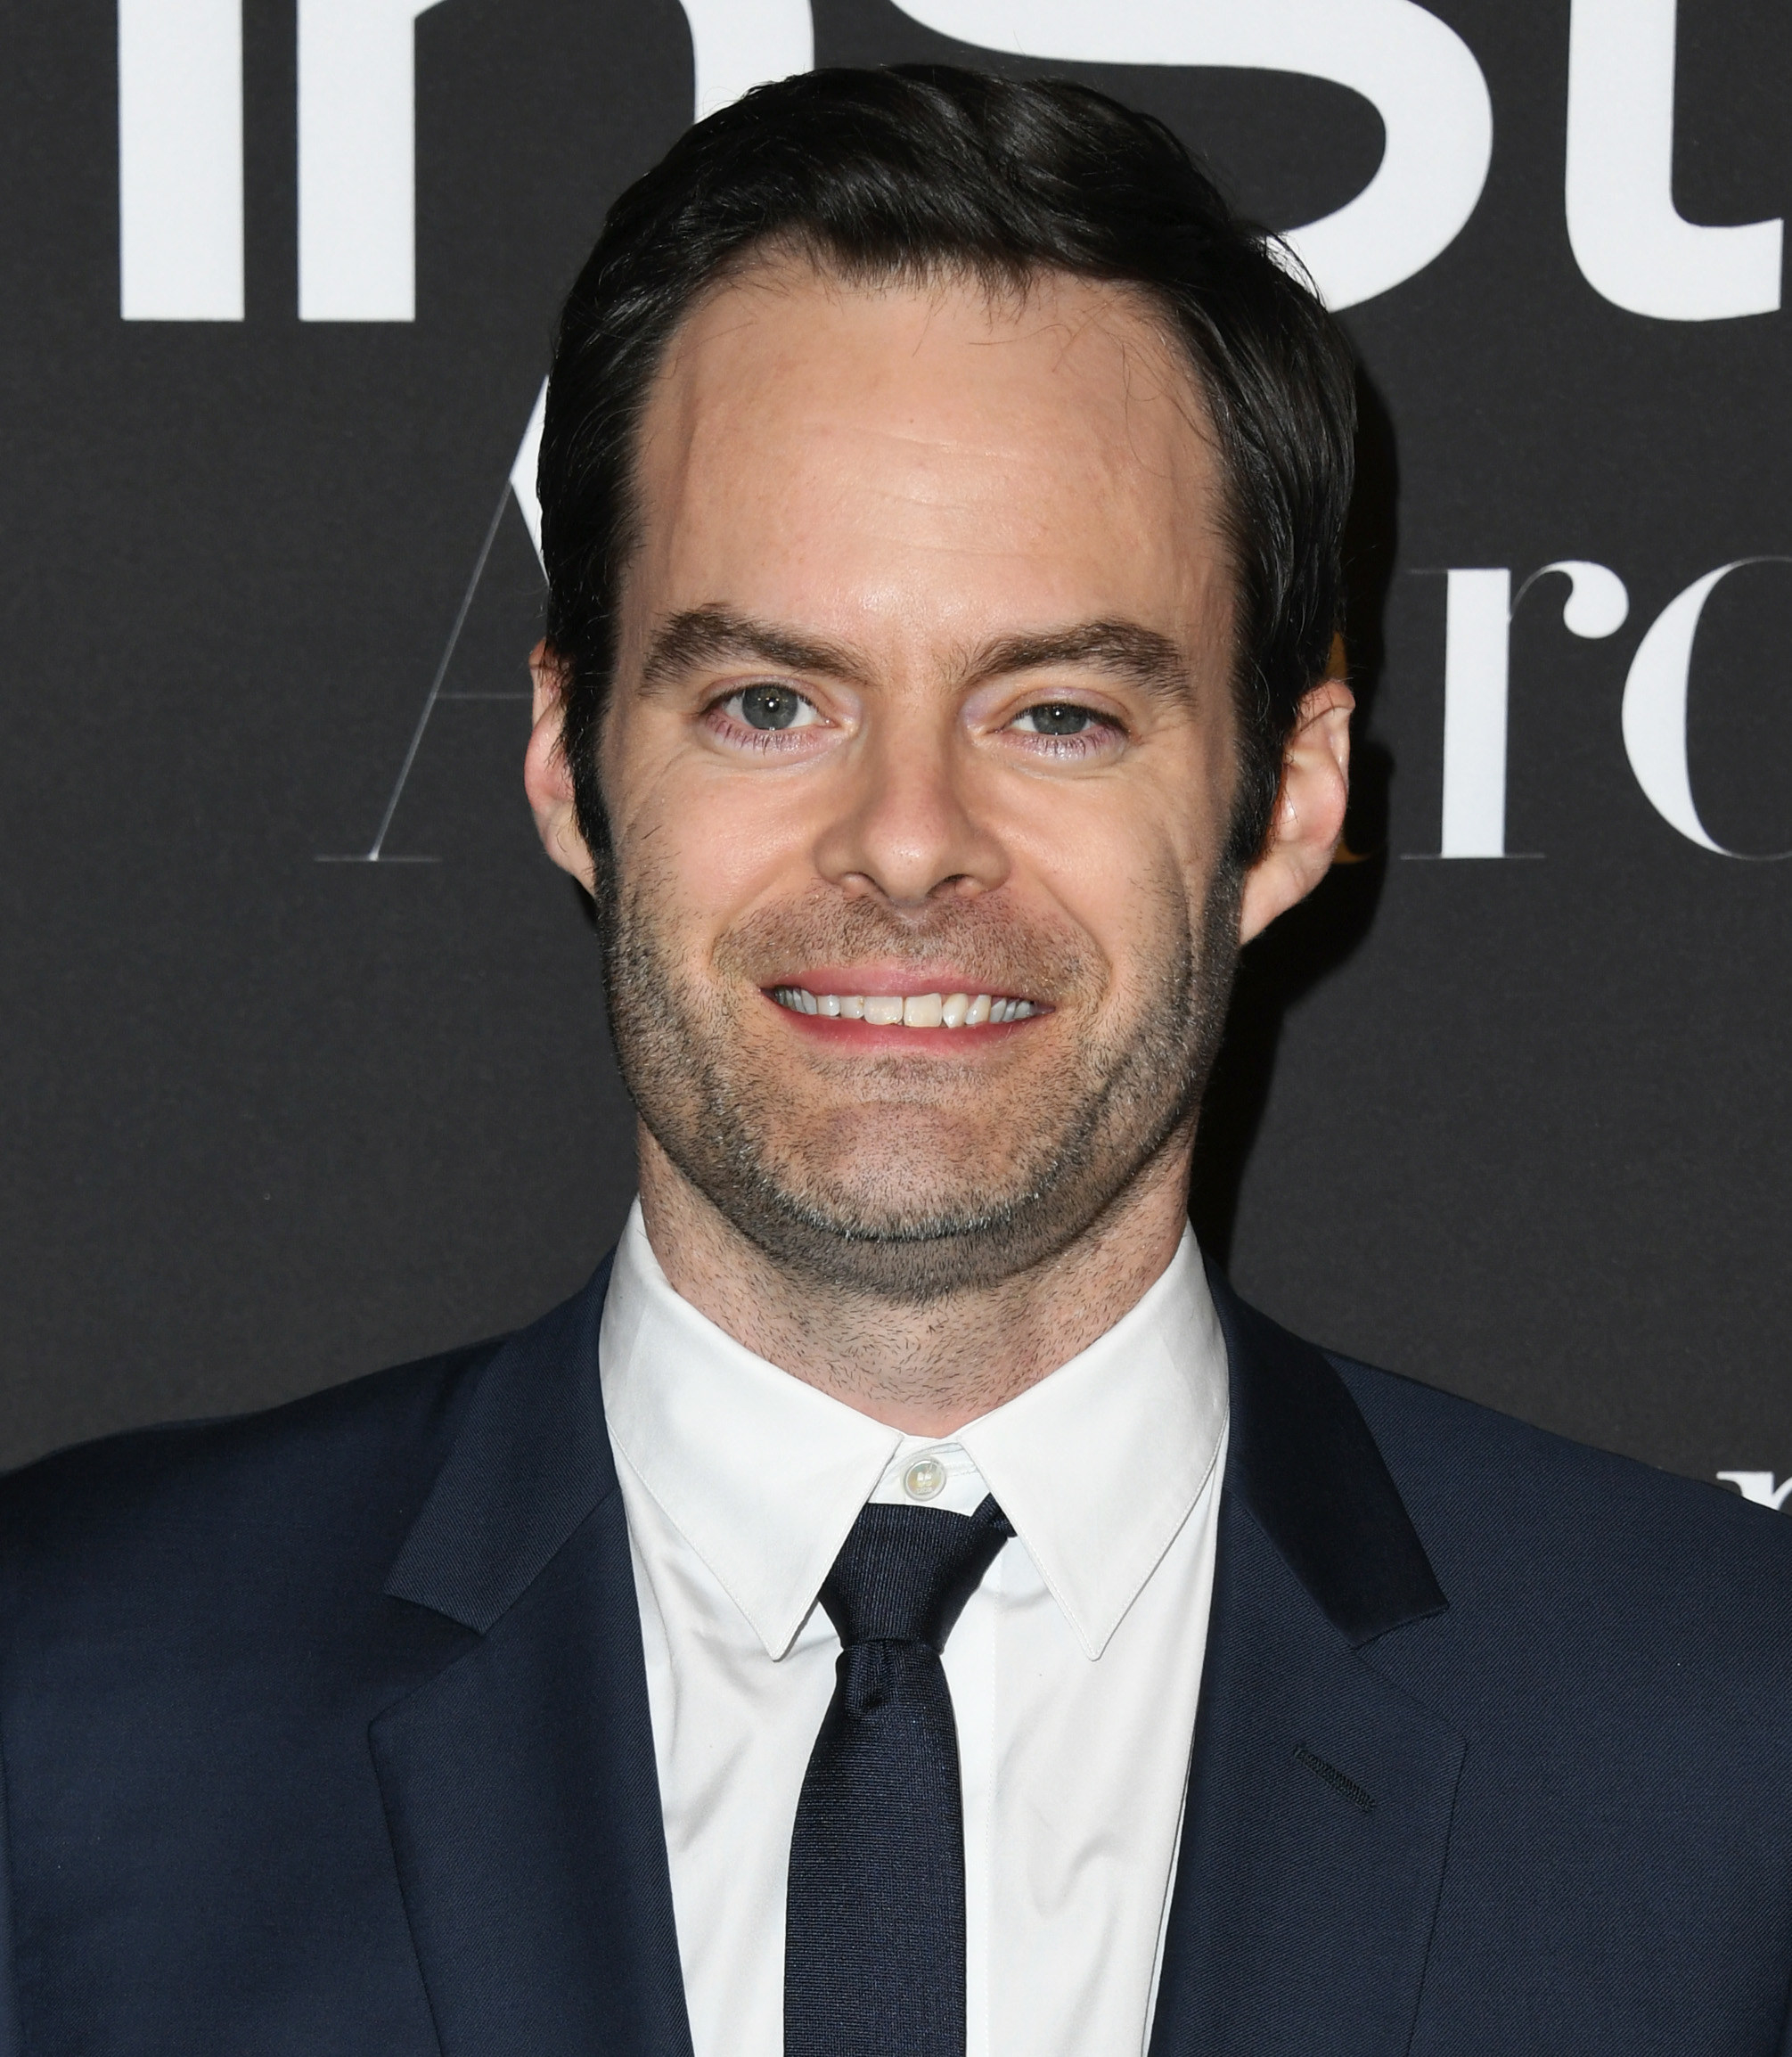 Bill Hader arrives at the InStyle Awards on October 21, 2019